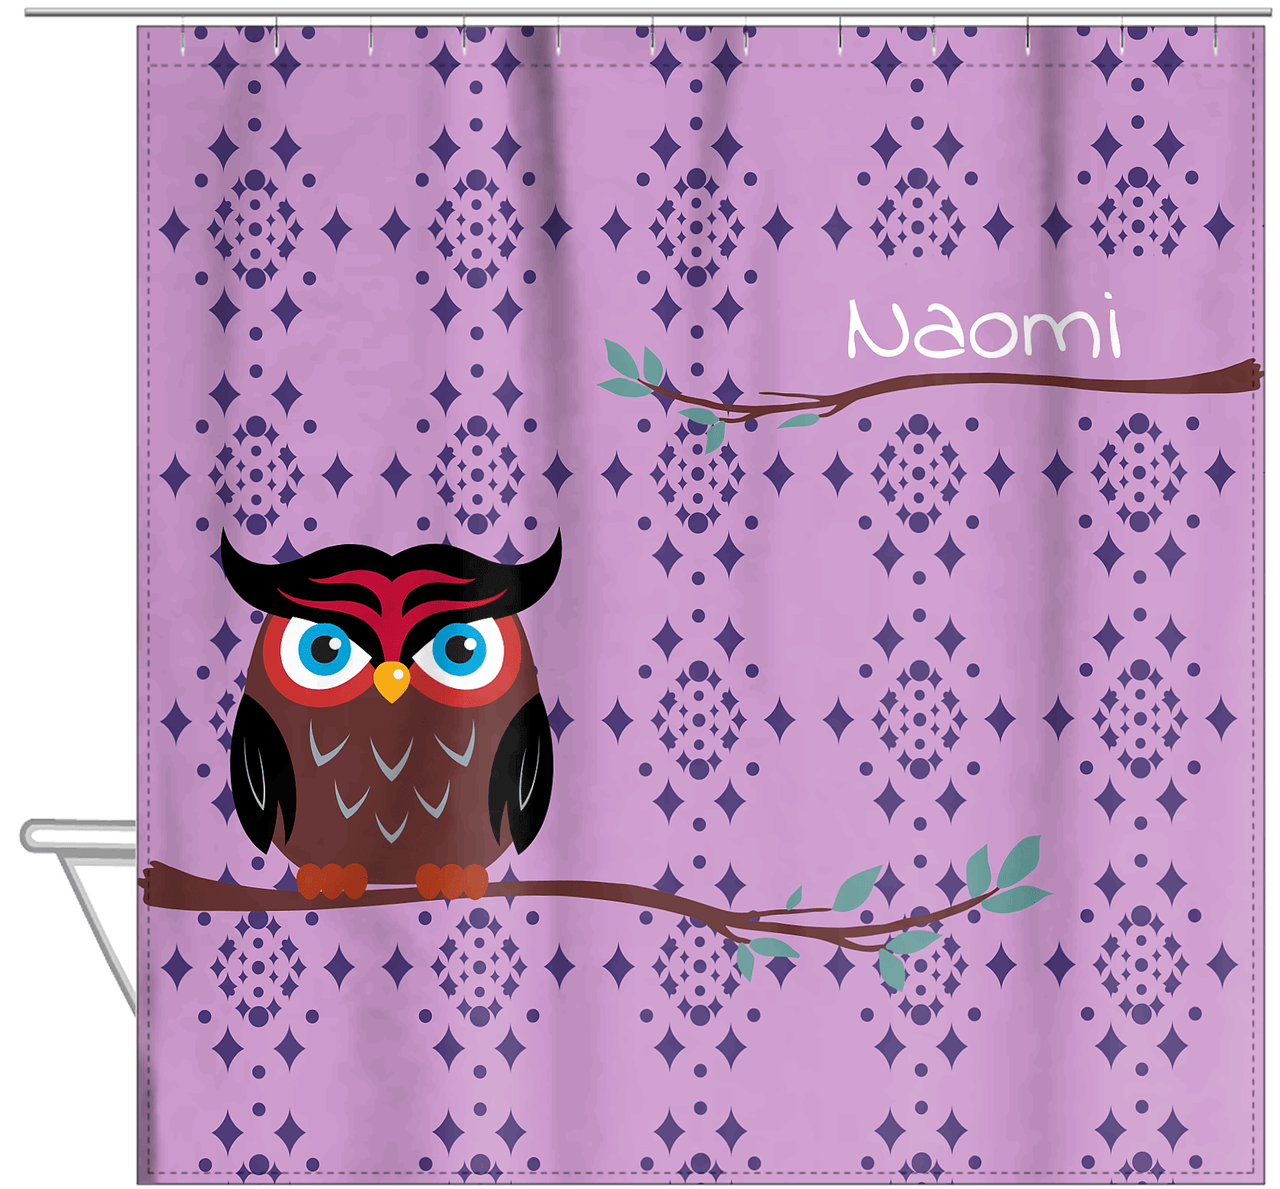 Personalized Owl Shower Curtain I - Owl 02 - Pink Background - Hanging View